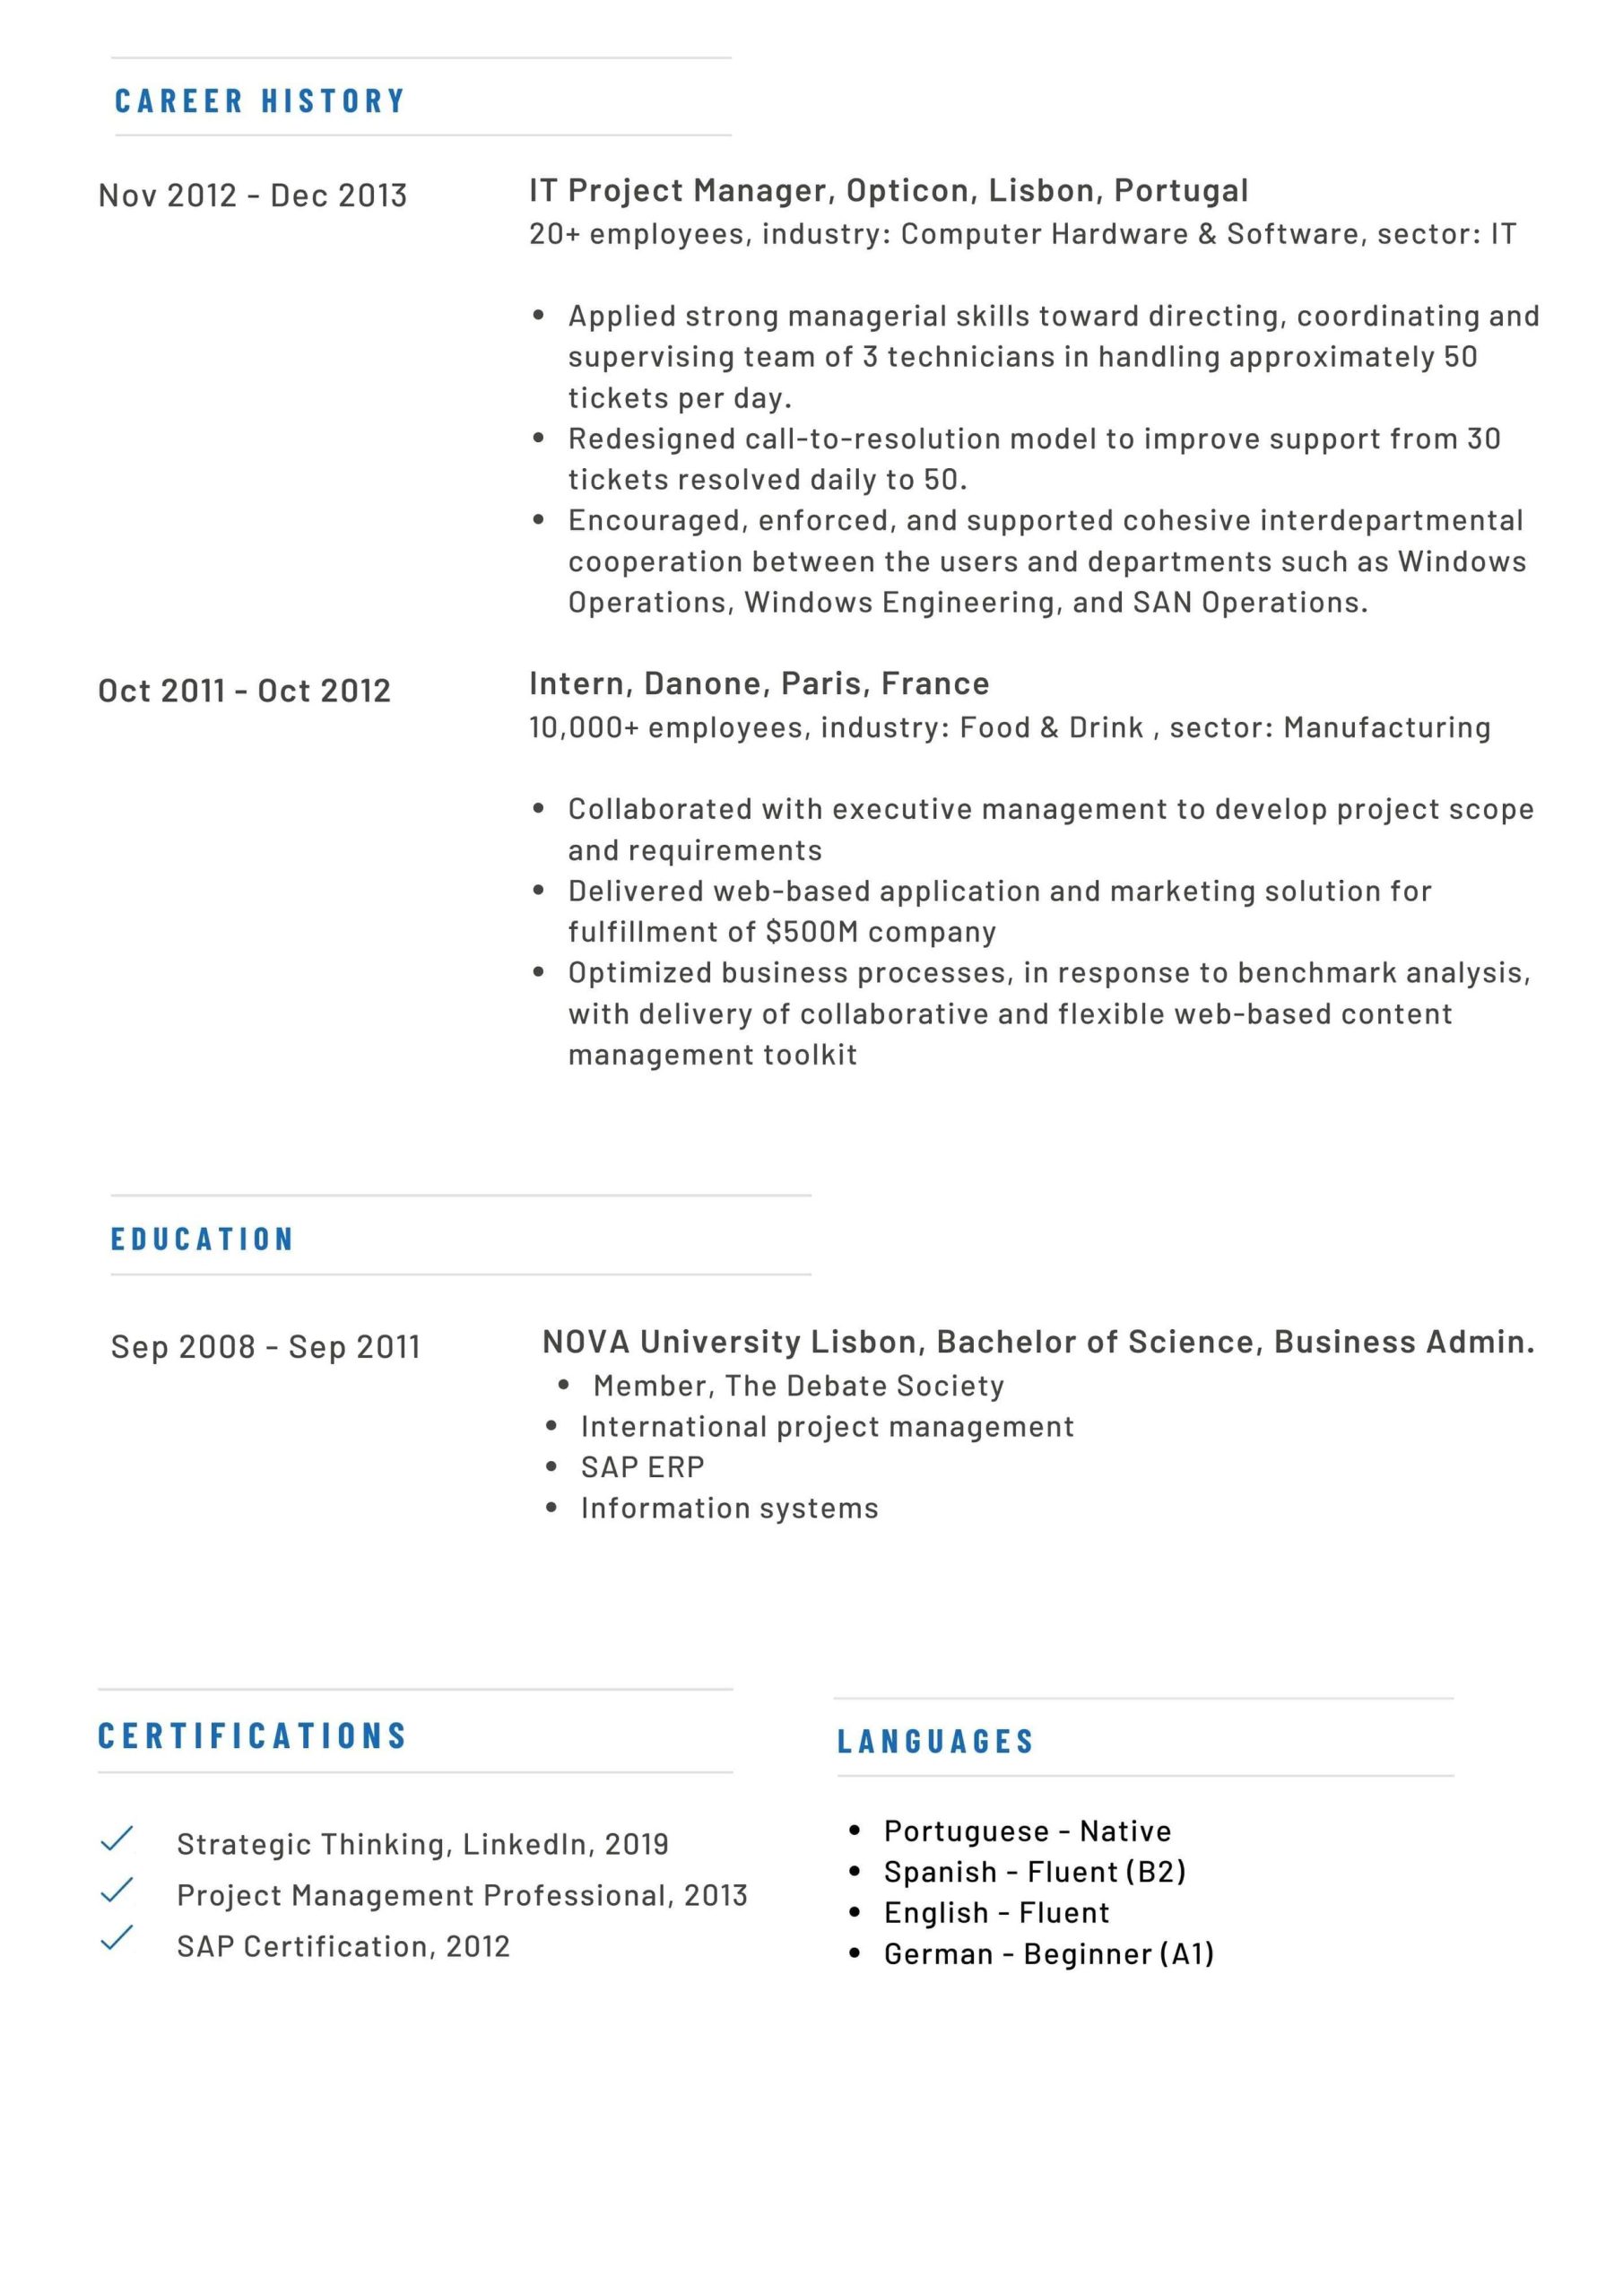 Sample Resume for Visa Recruiter Position How to Write A Cv or Lebenslauf In Germany â Hallogermany